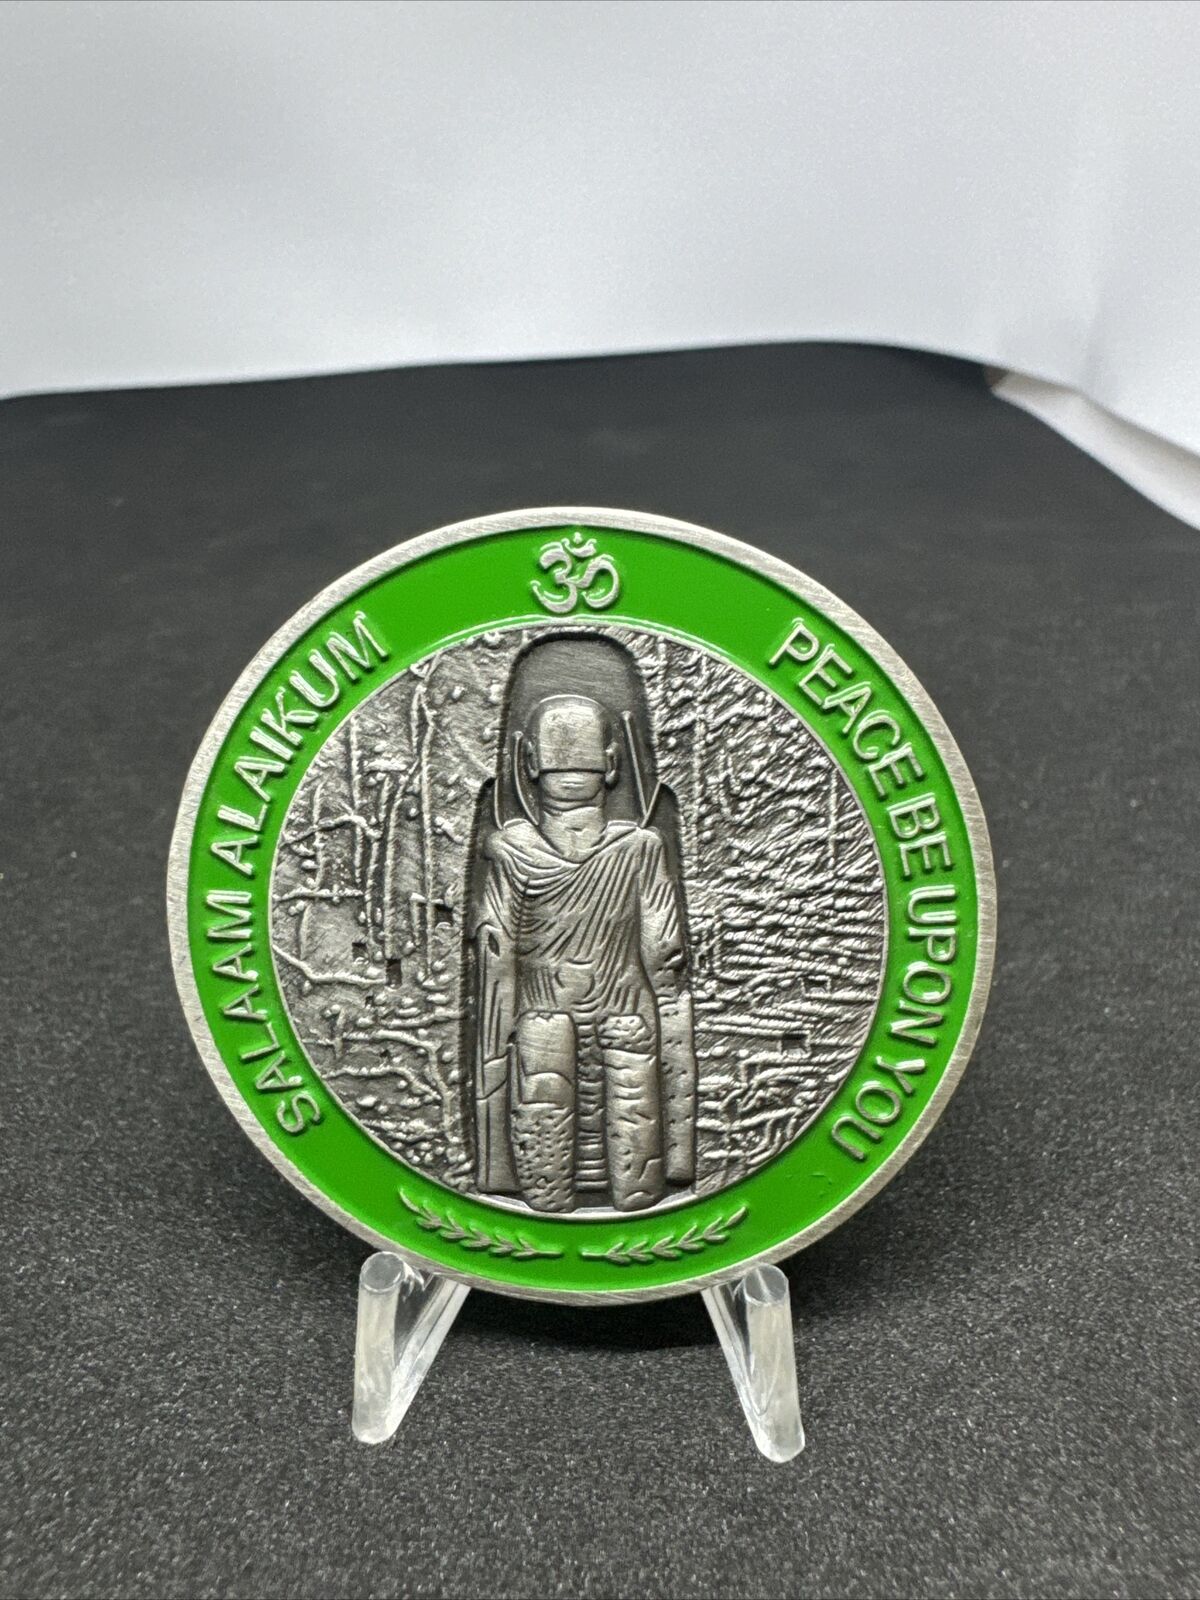 CIA DIRECTORATE OF INTEL POLITICAL ISLAM “PEACE BE UPON YOU” BAMYAN BUDDAHS Coin